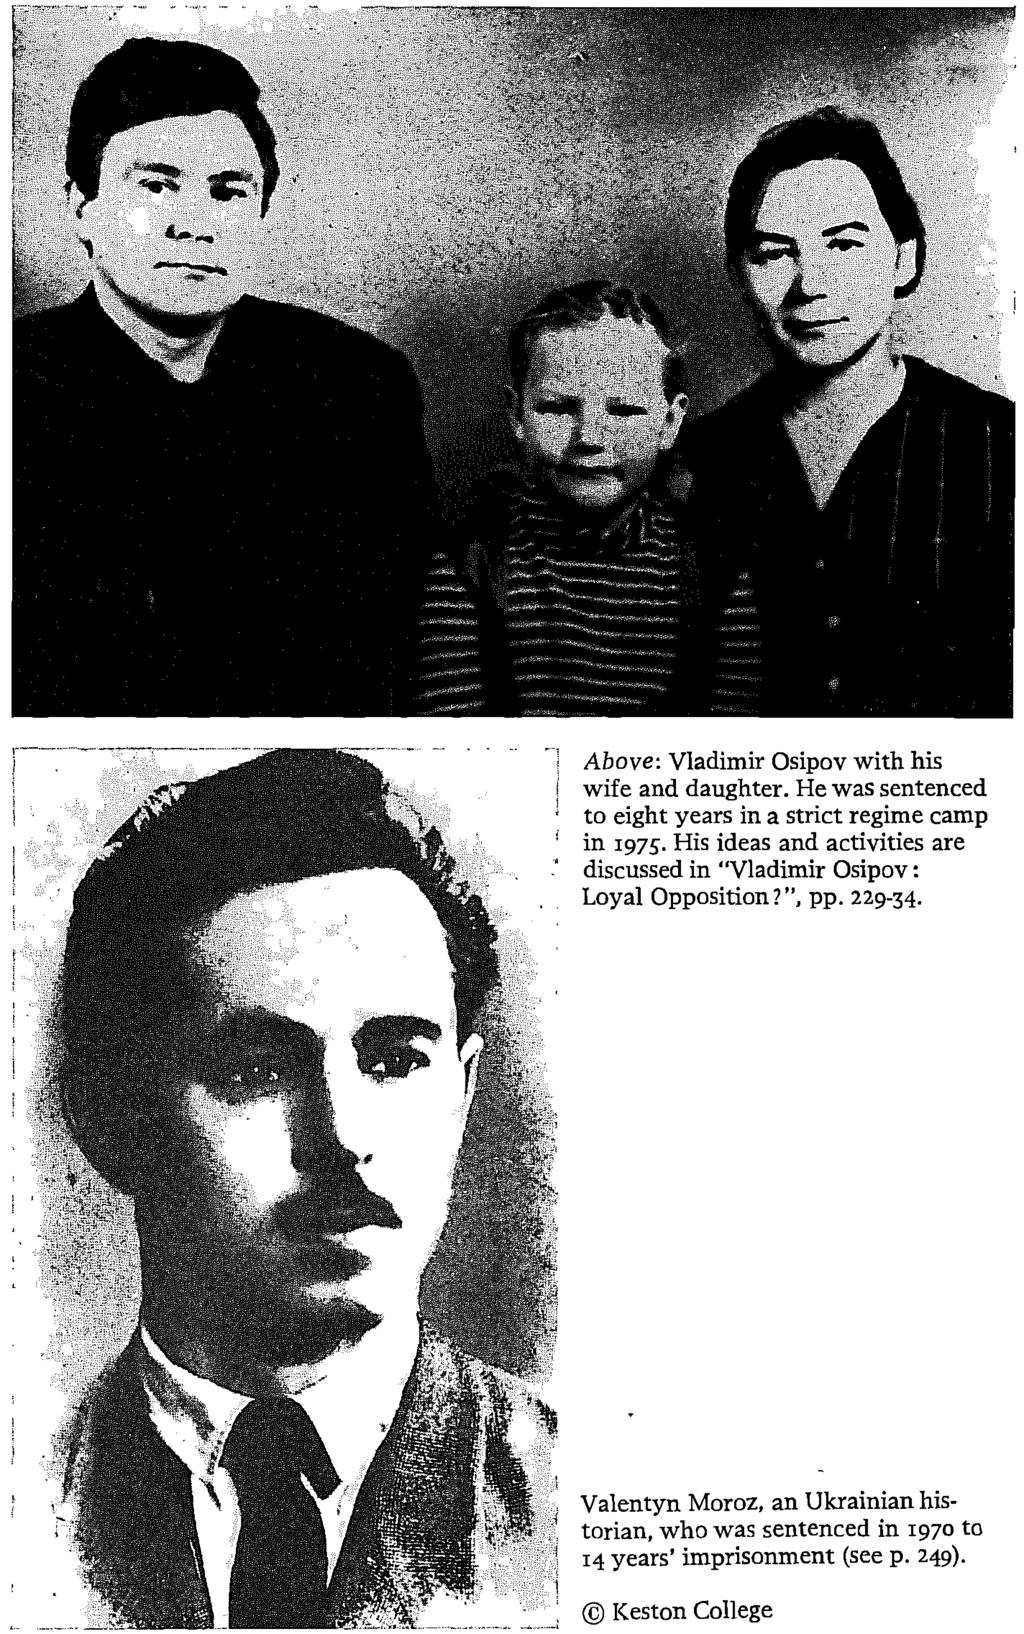 Above: Vladimir Osipov with his wife and daughter. He was sentenced to eight years in a strict regime camp in 1975.